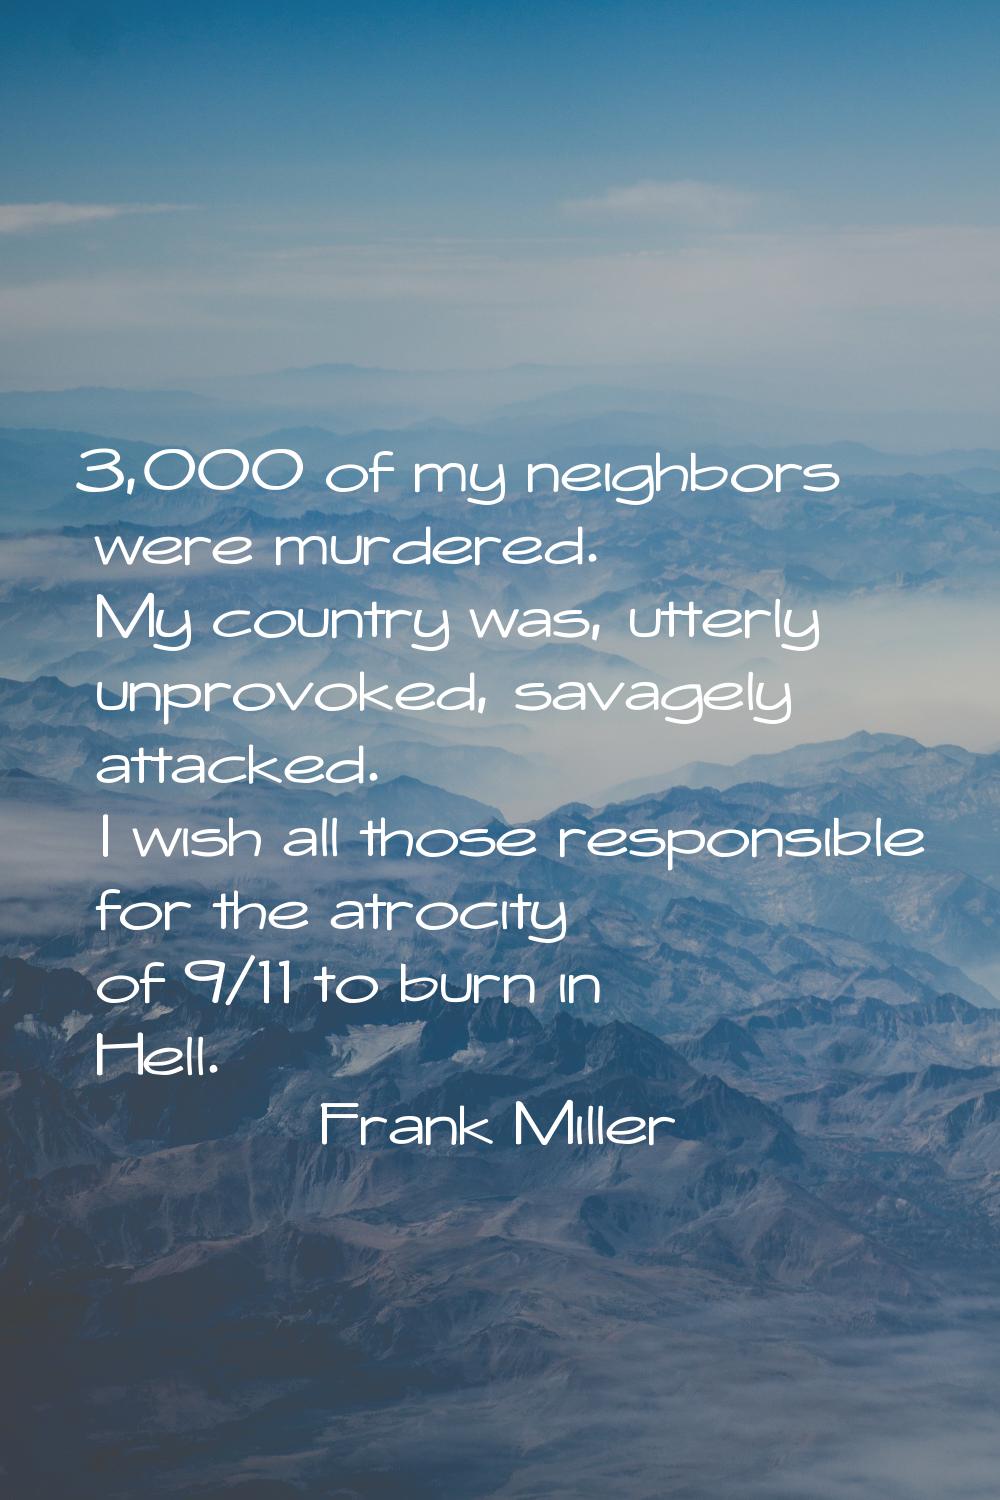 3,000 of my neighbors were murdered. My country was, utterly unprovoked, savagely attacked. I wish 